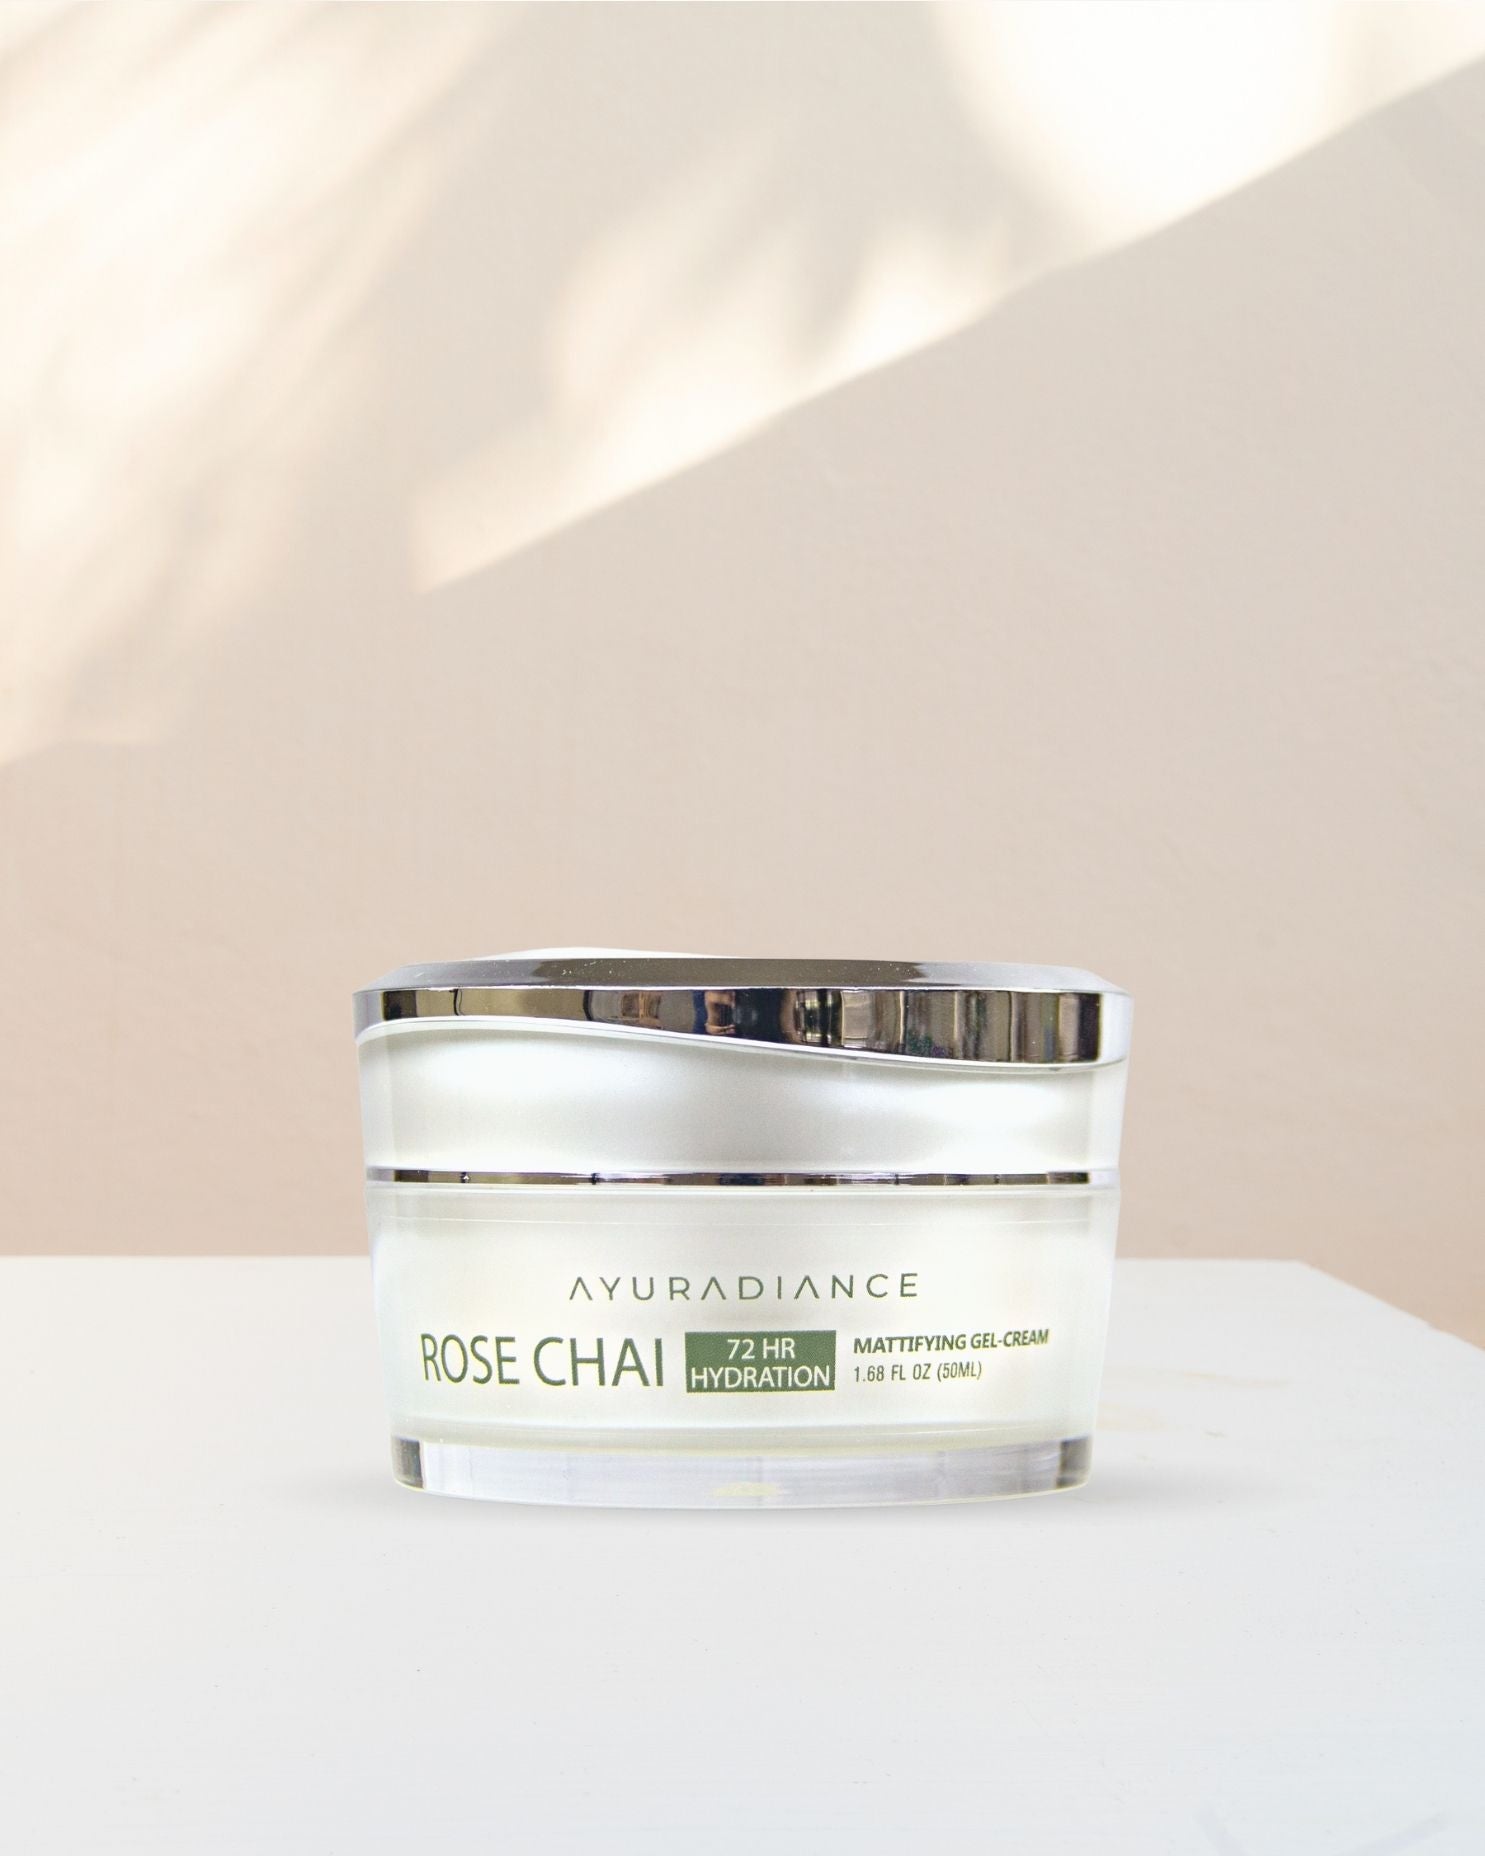 Rose Chai Best Hydrating Face Cream for Oily Skin